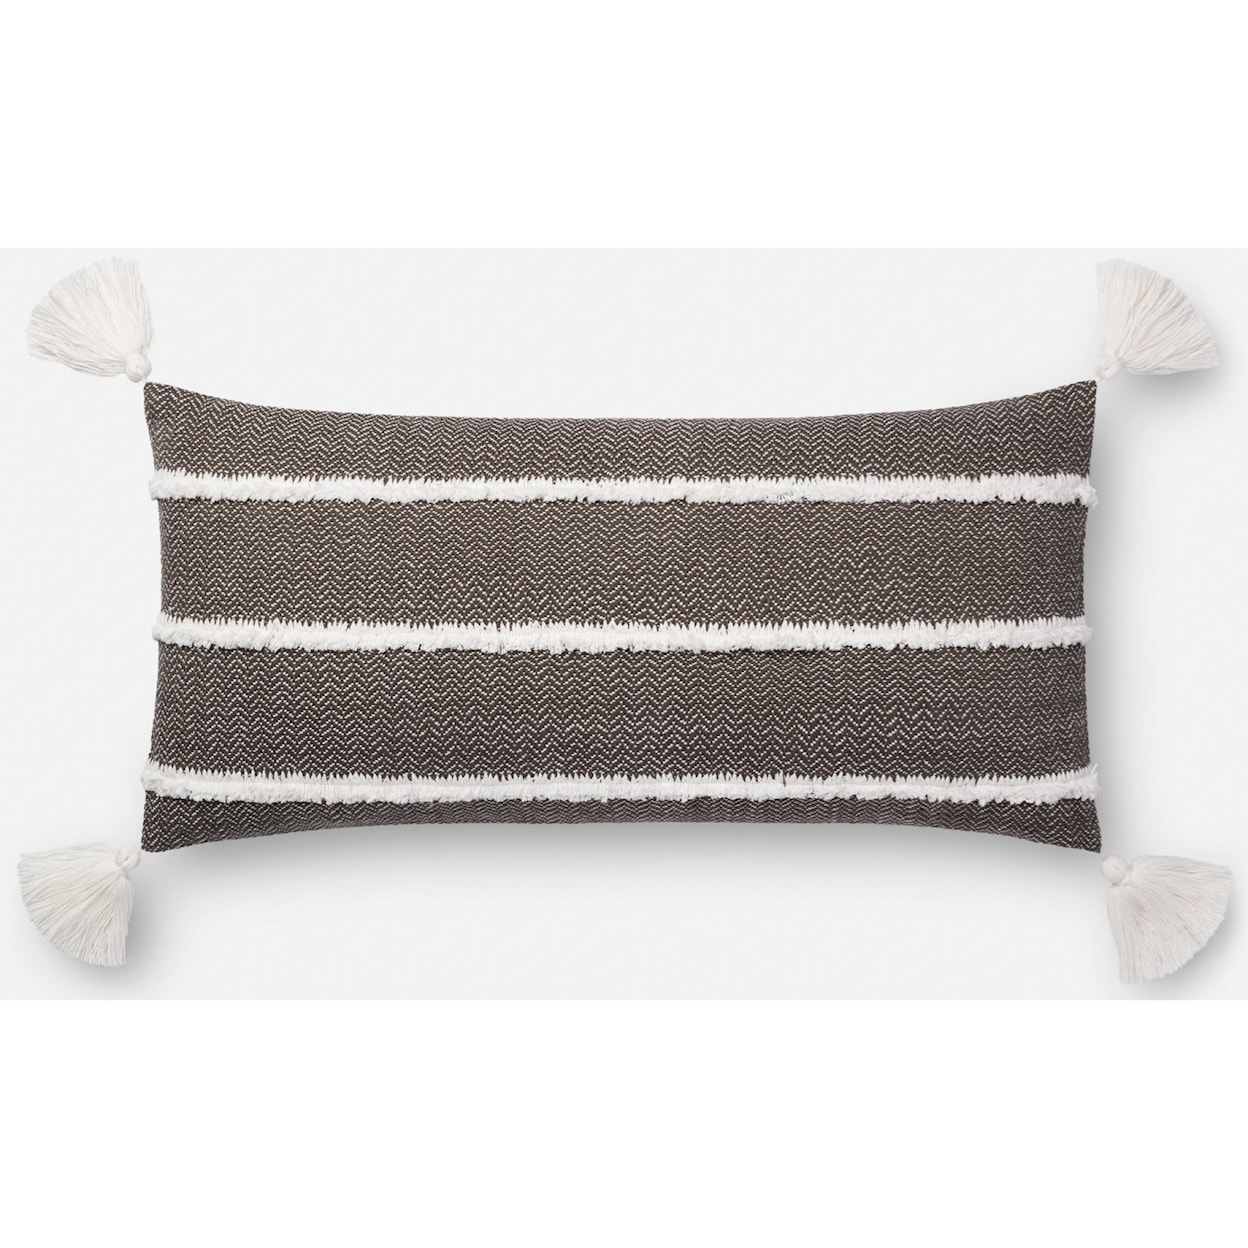 Magnolia Home by Joanna Gaines for Loloi Accent Pillows 12" x 27" Down Pillow